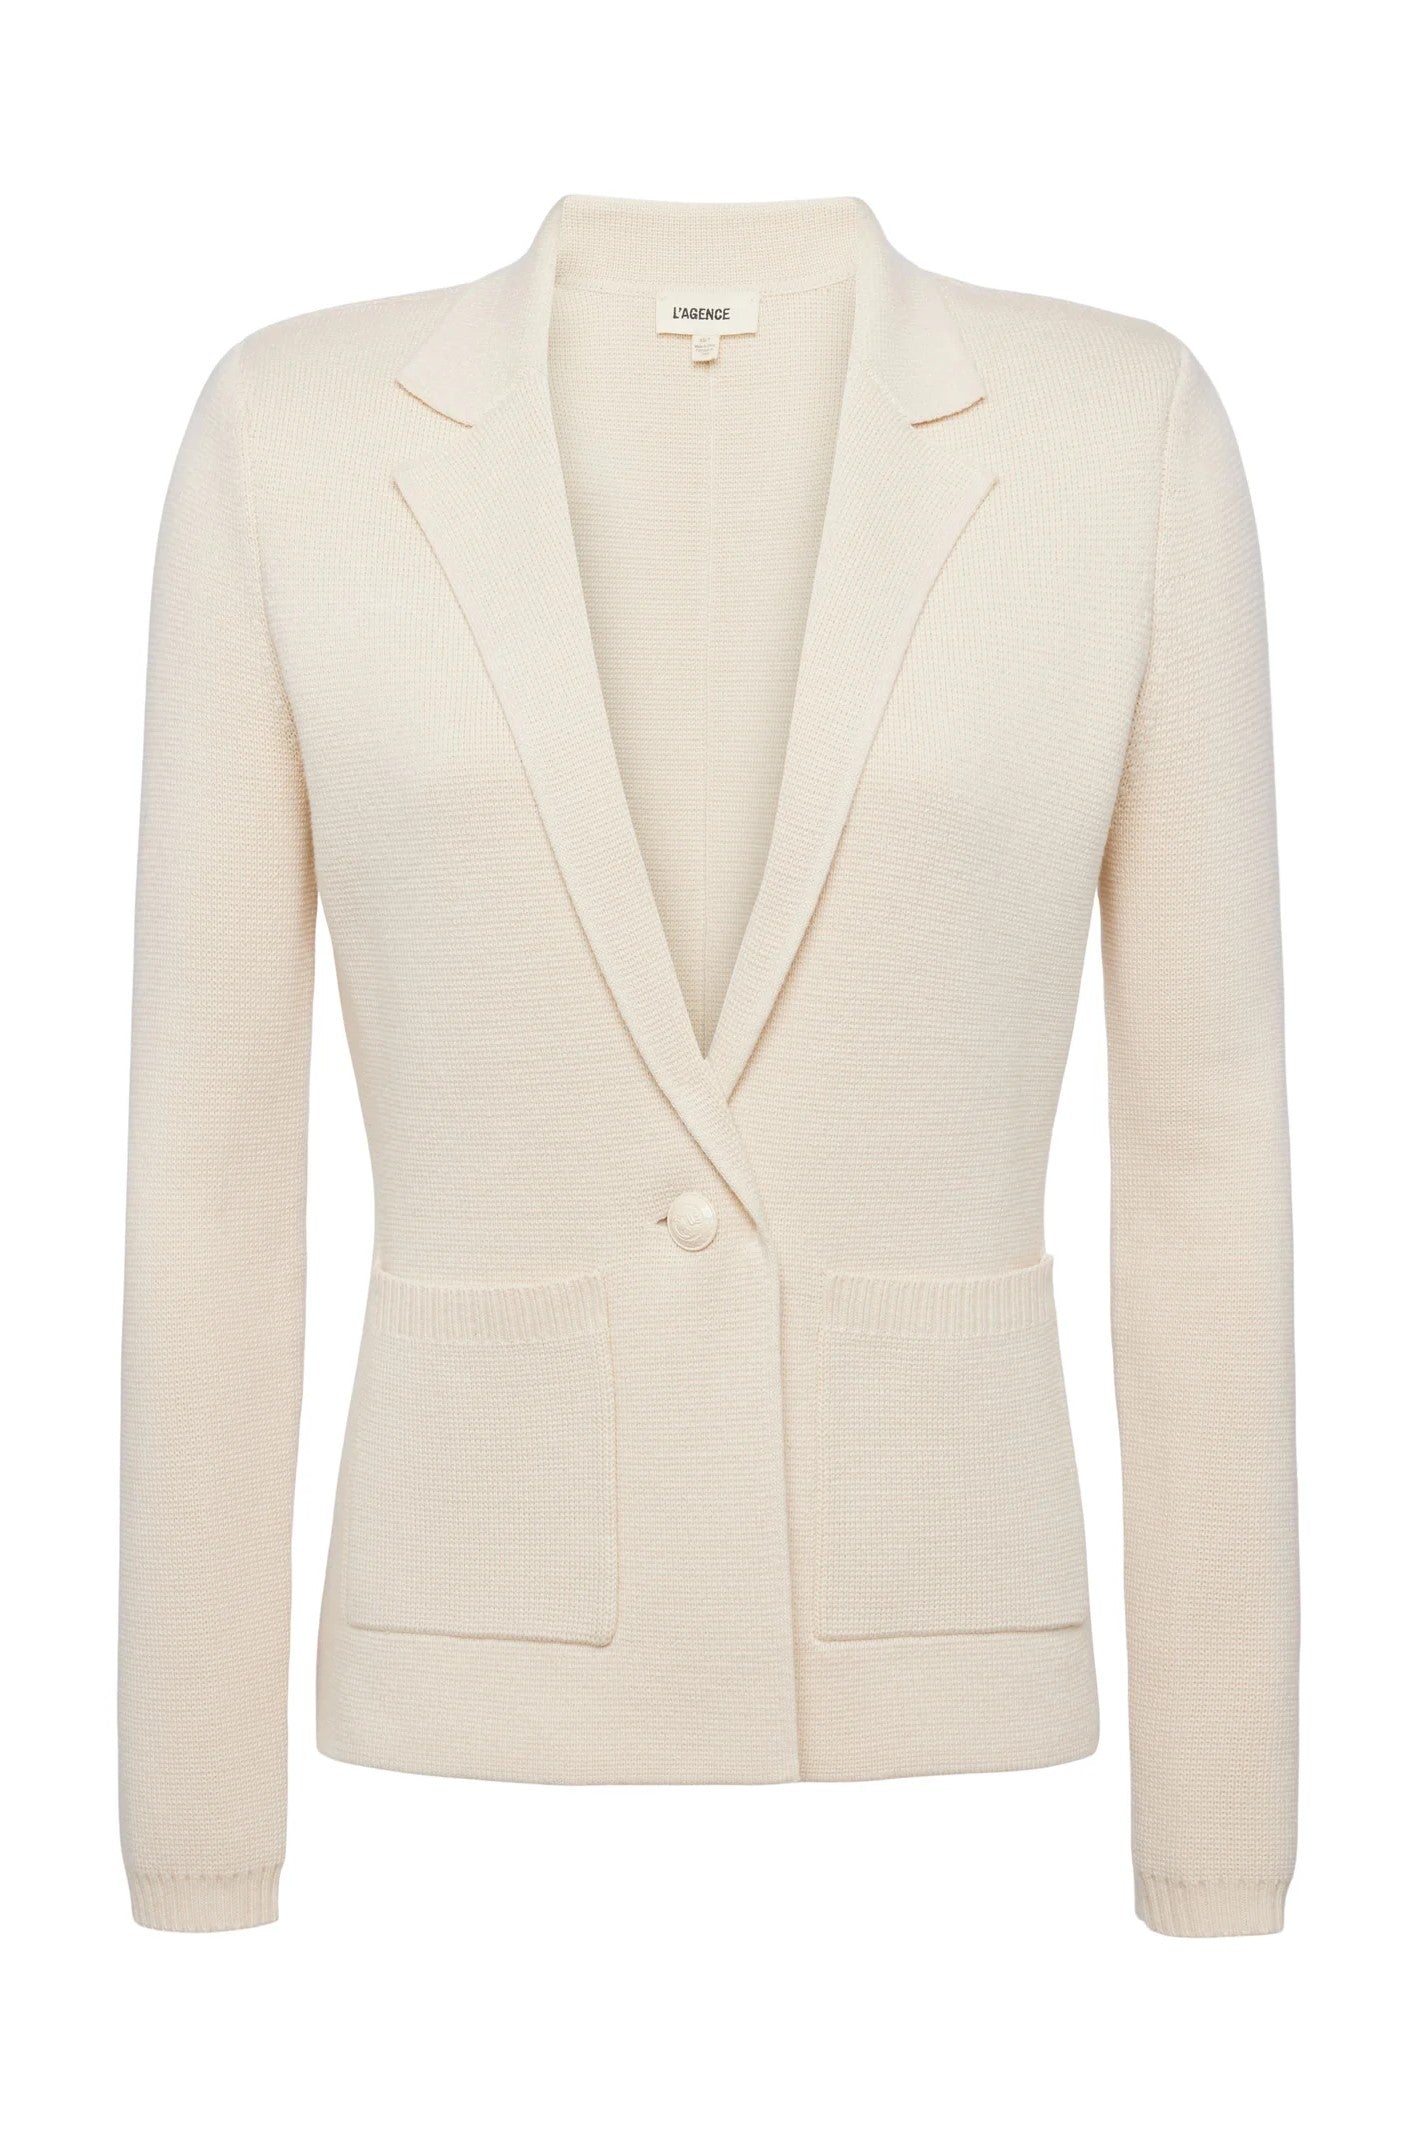 L'Agence Lacey Knit Single Breasted Blazer